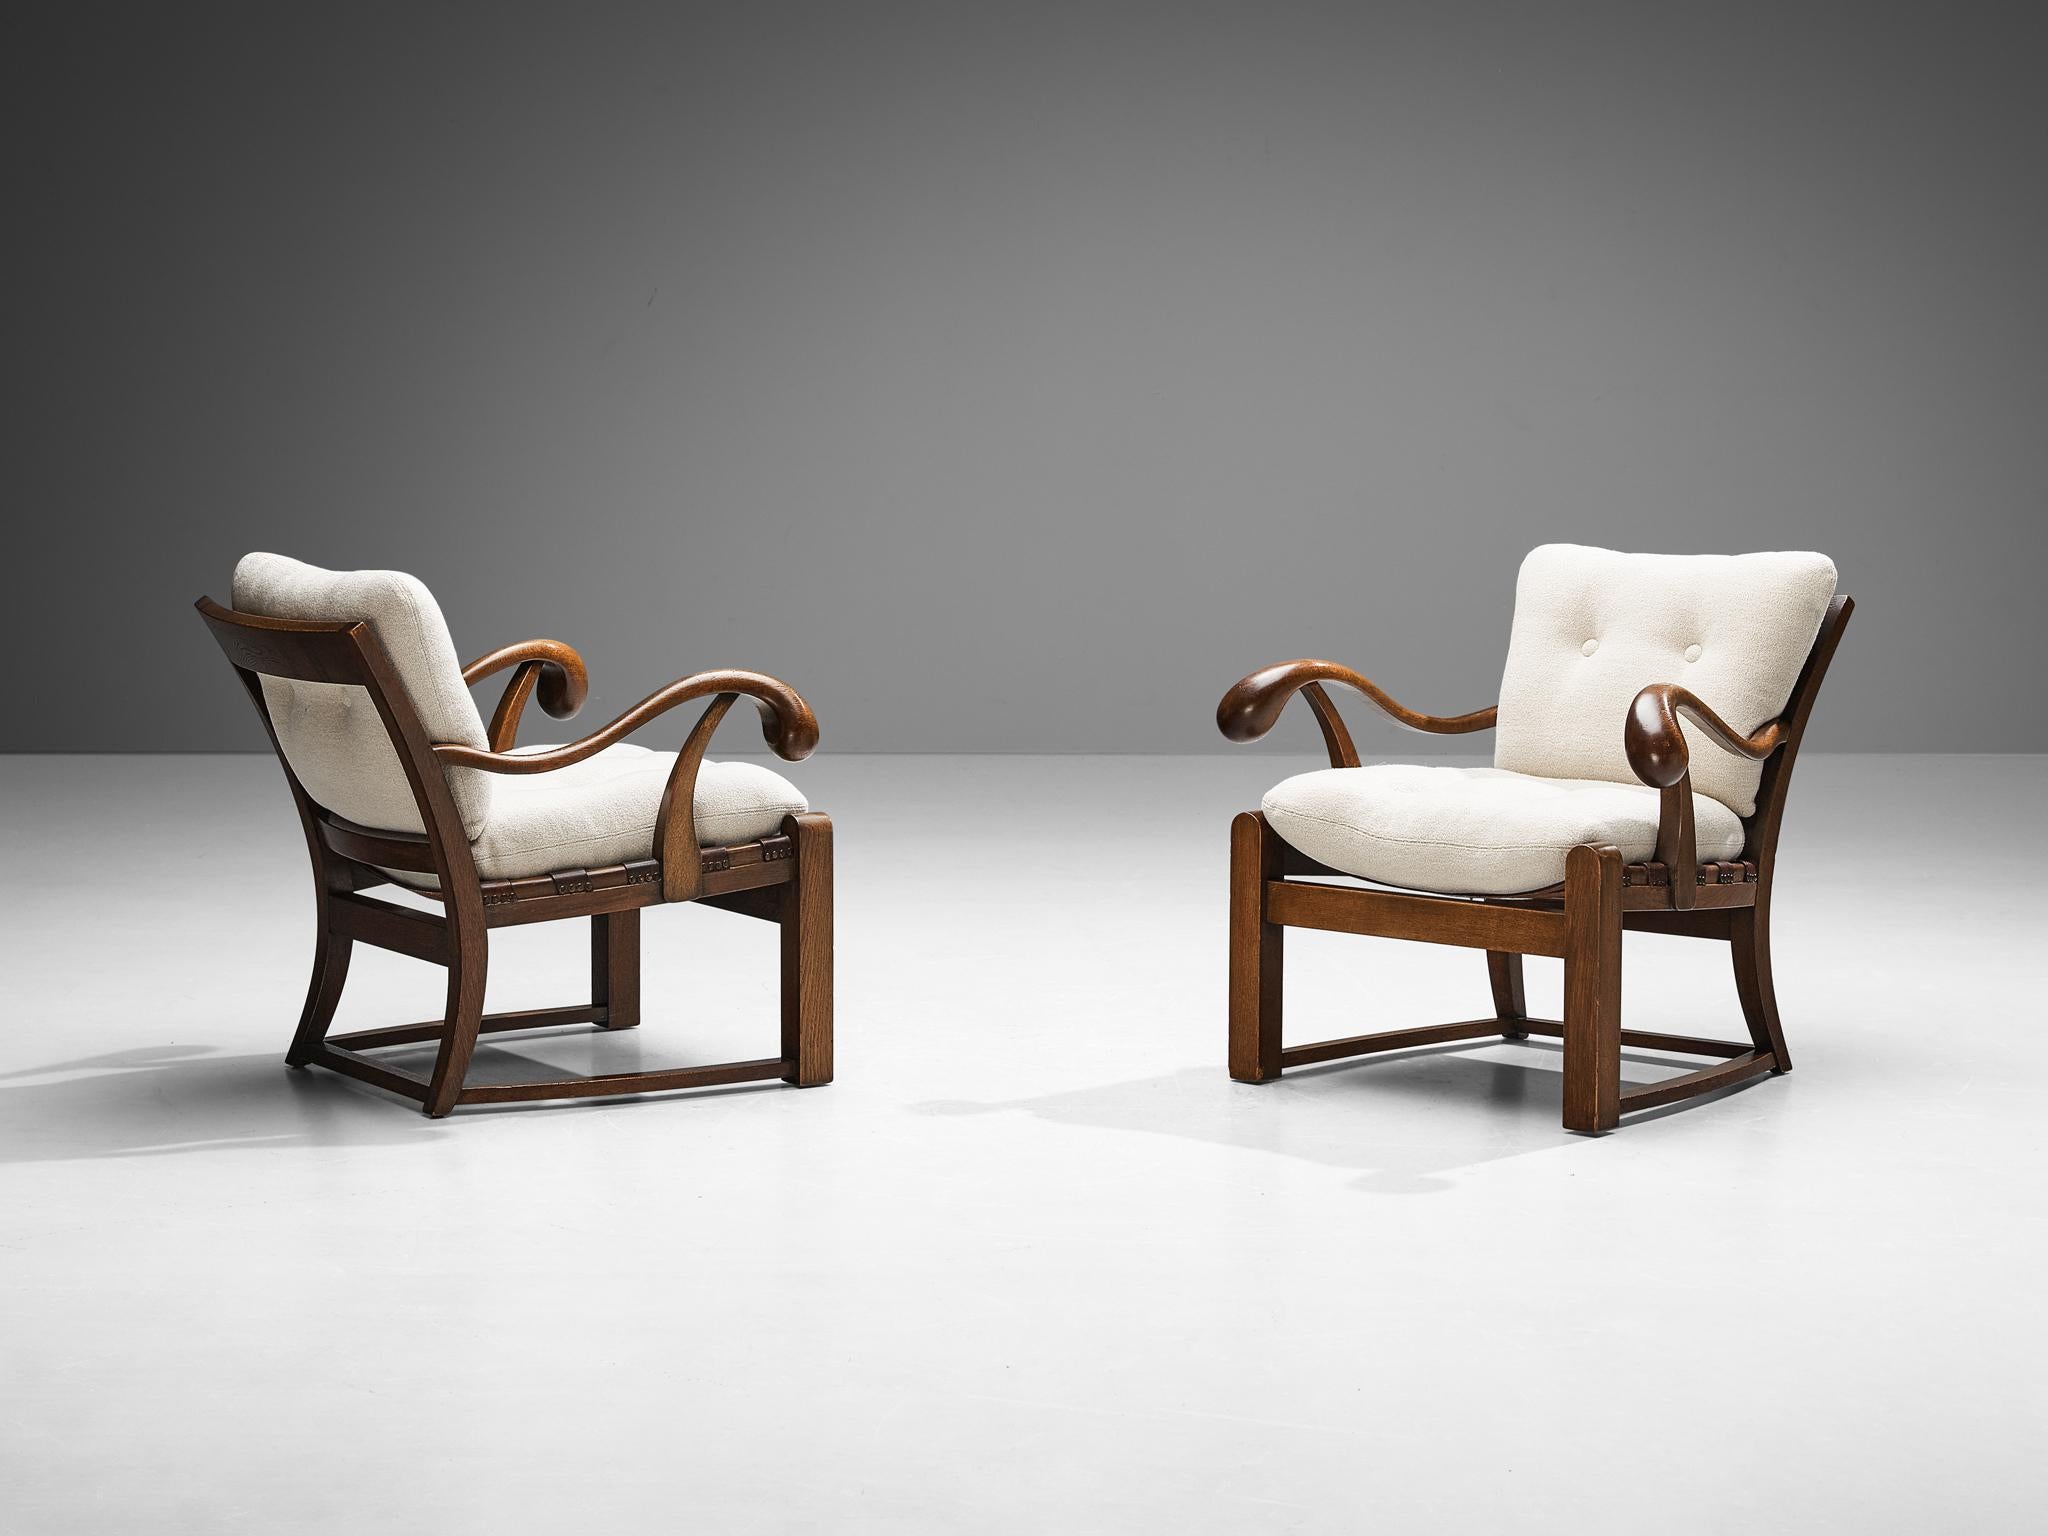 Pair of lounge chairs, oak, reupholstered in Pierre Frey wool, leather, brass, France, 1940s

These beautifully designed armchairs of French origin hold a striking construction by means of the sculpted elements discernible in the wooden frame. The